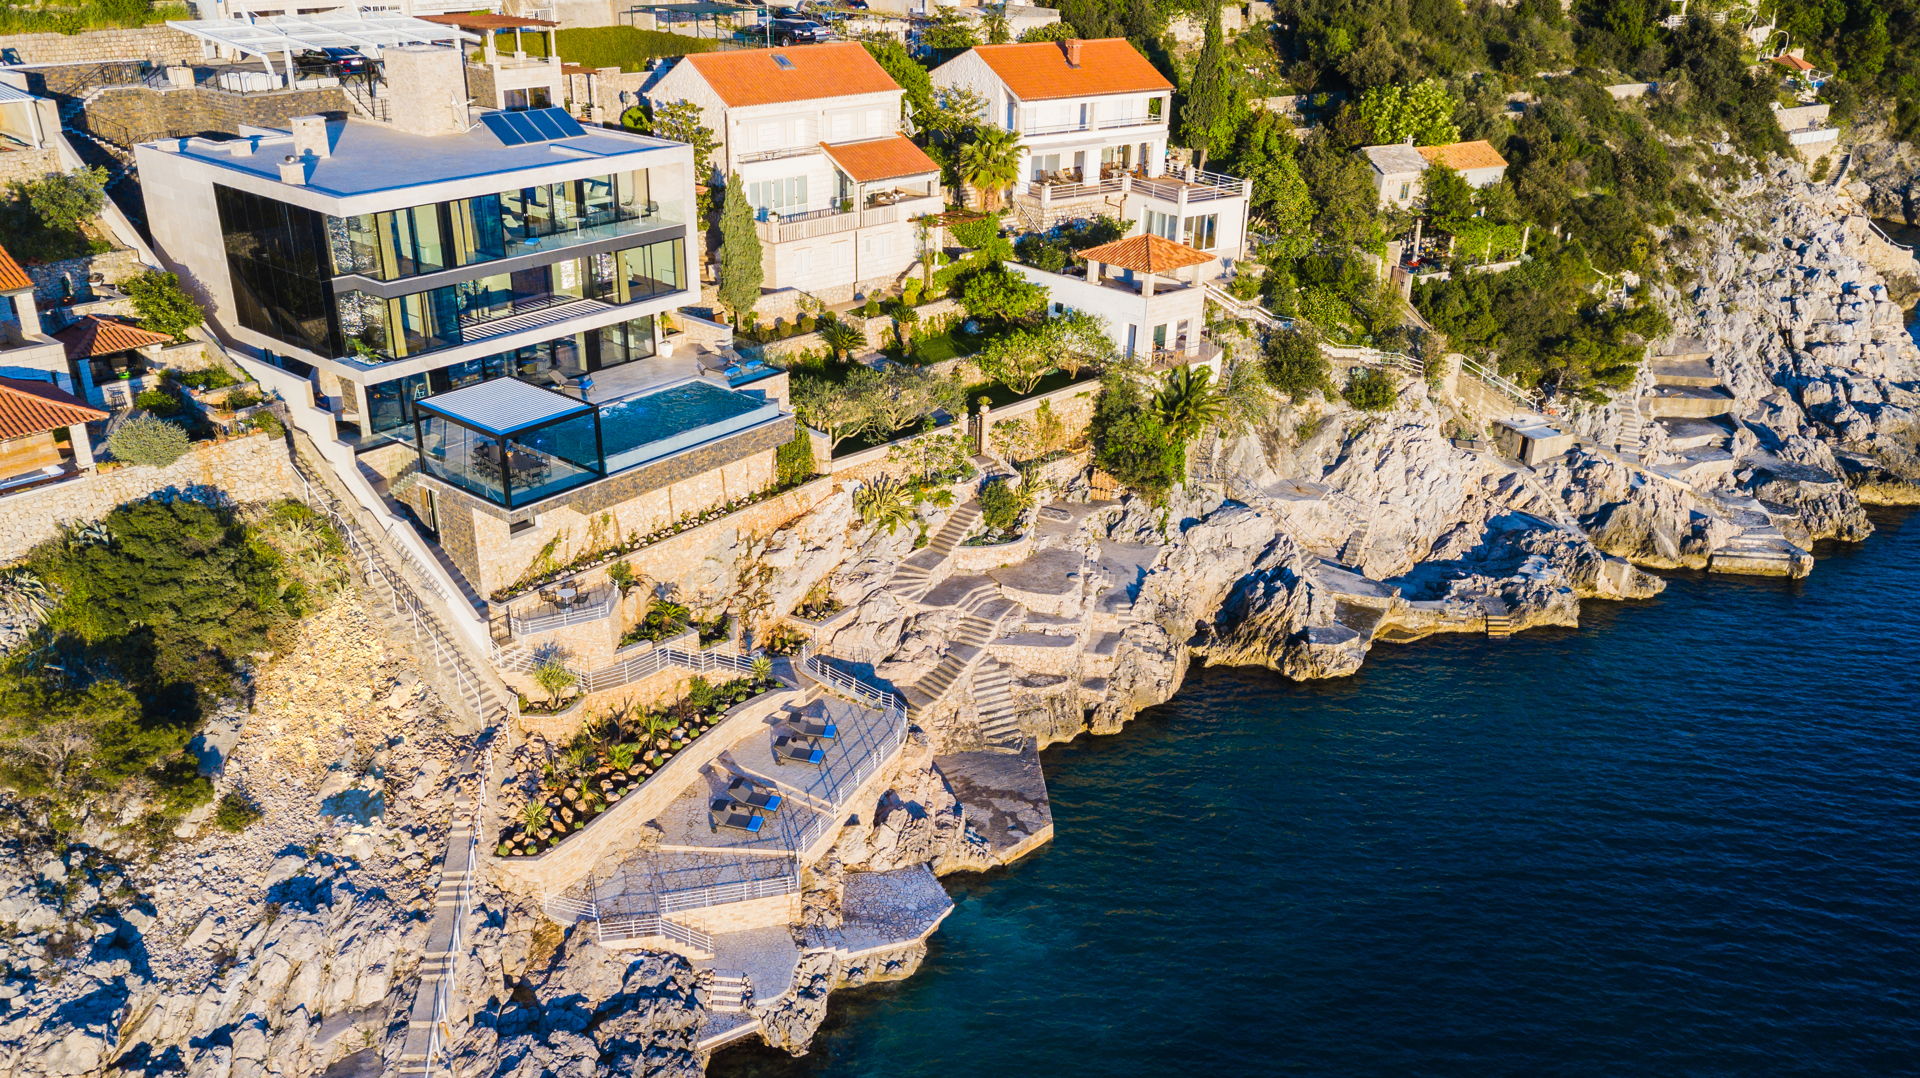 Seafront ultraluxury Villa Grand Oceania with Pool in Dubrovnik